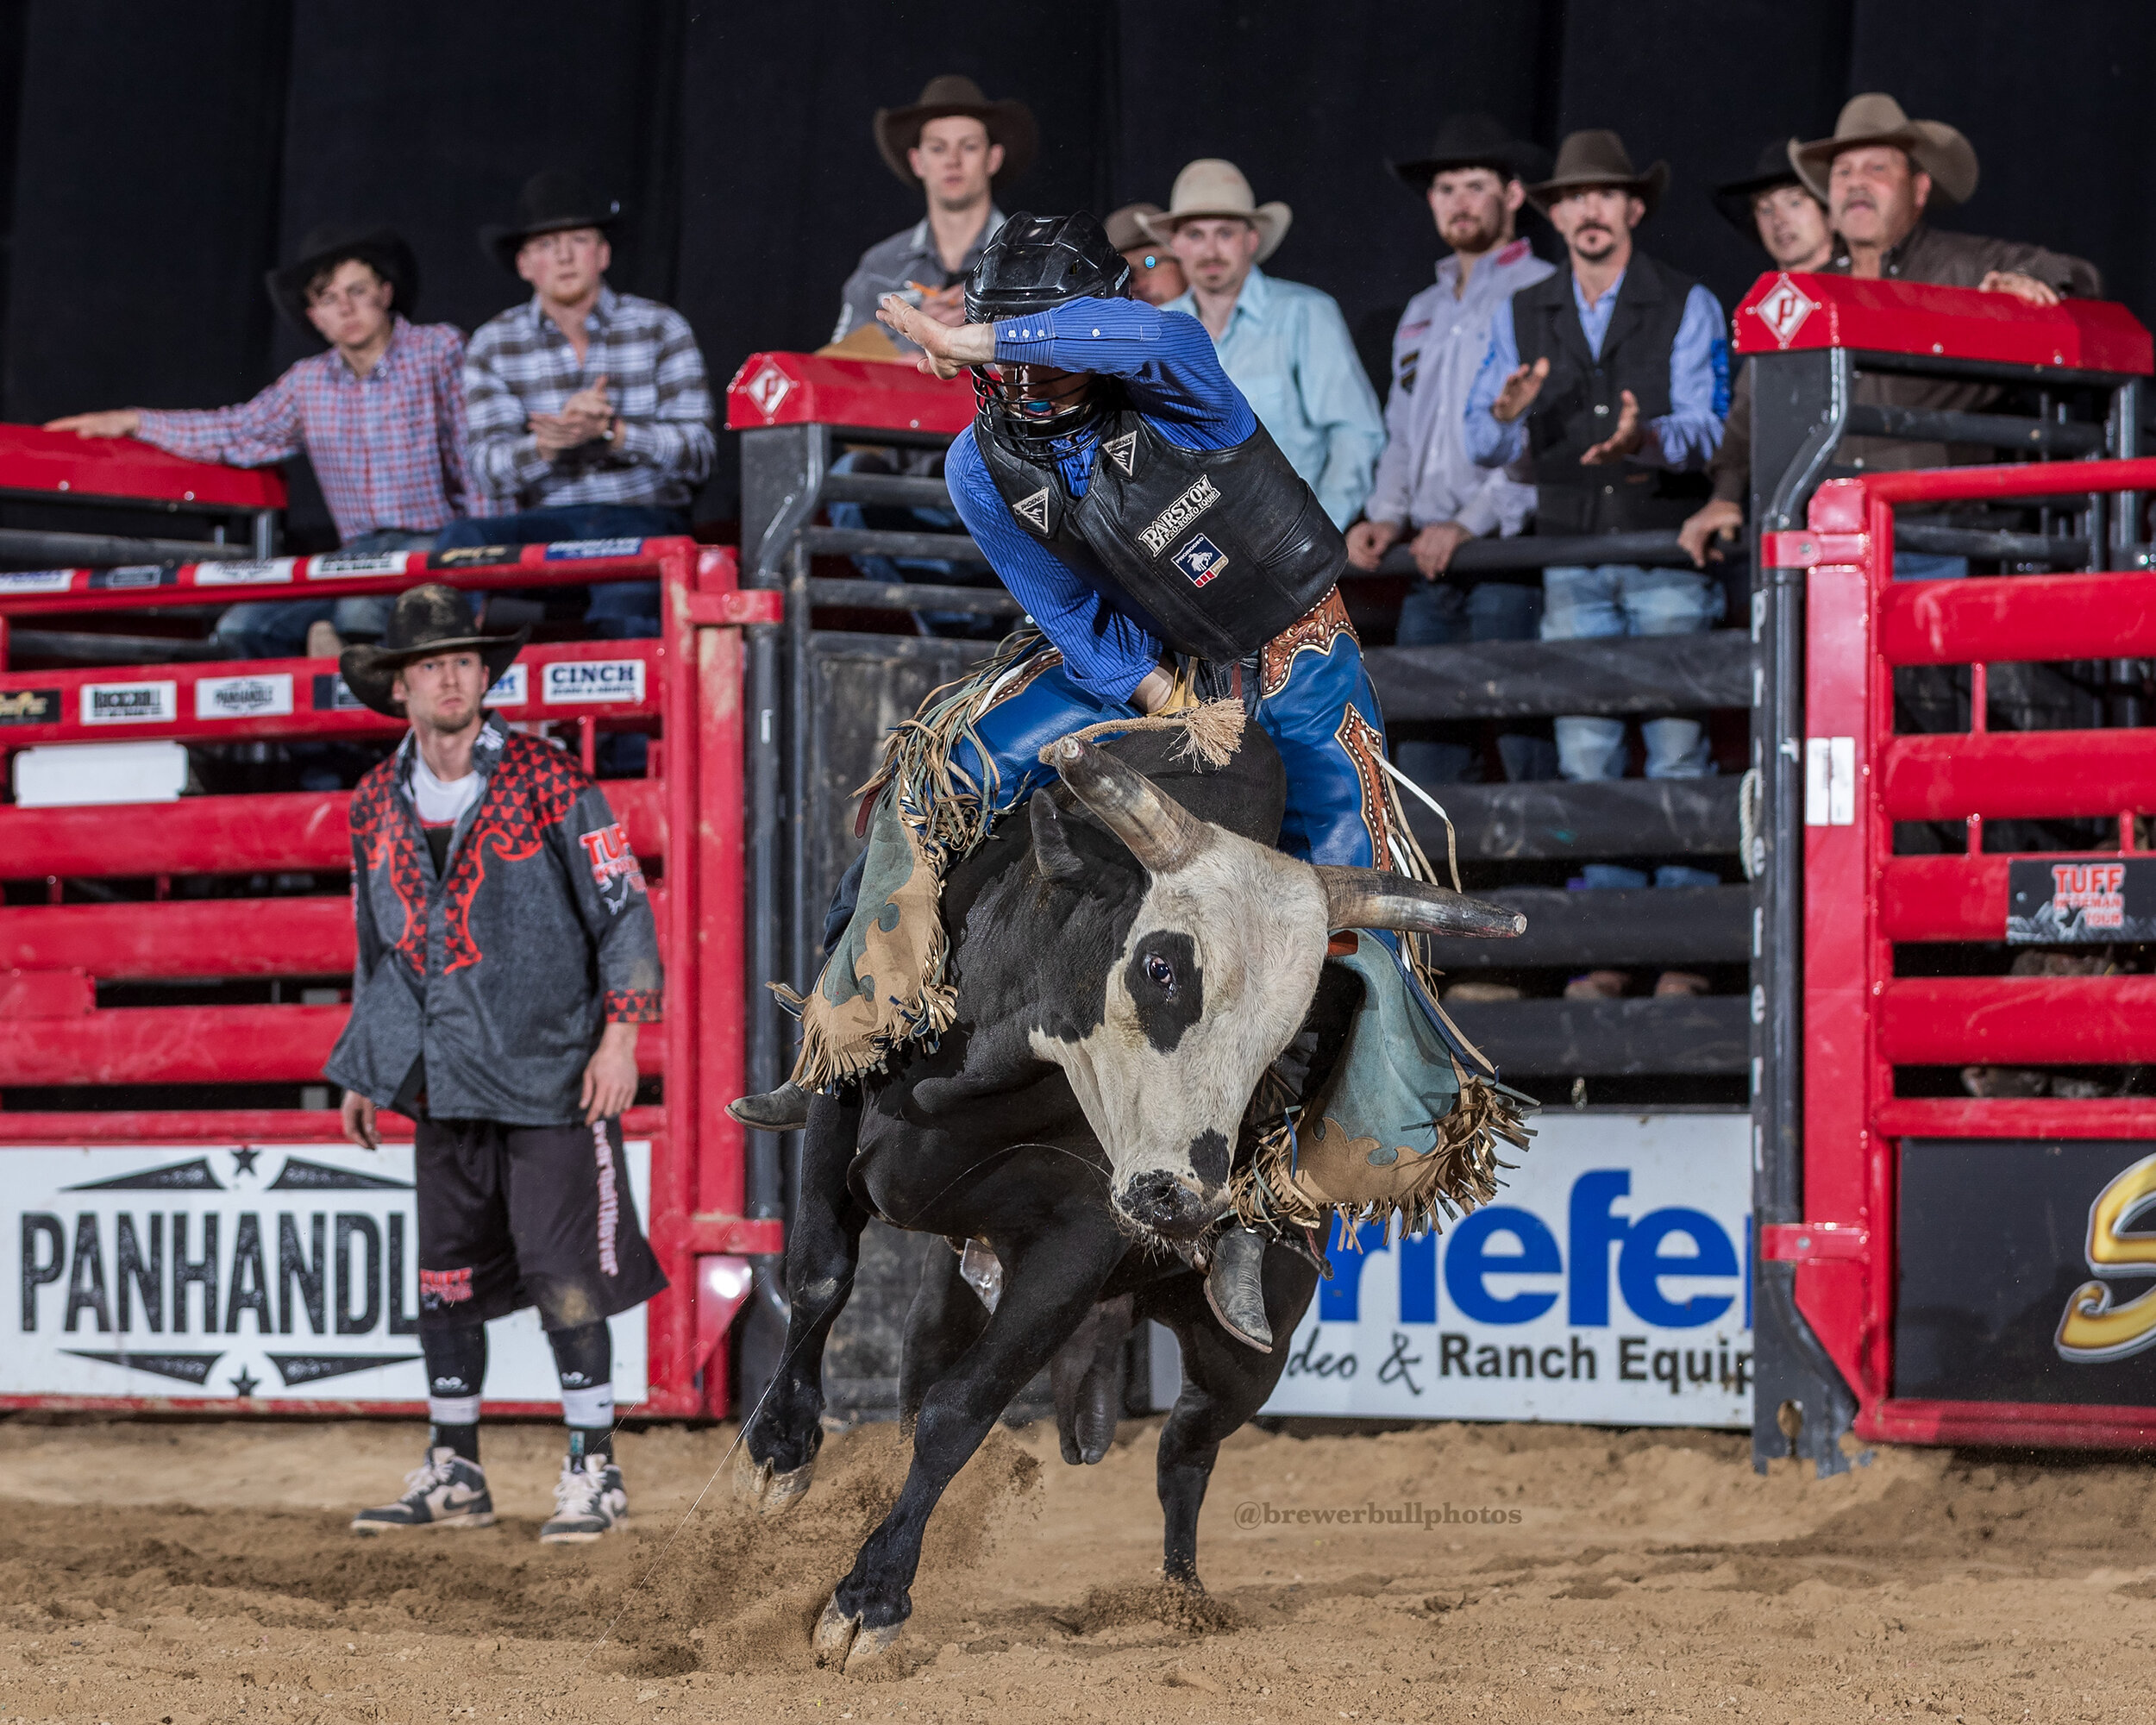 Yeary rides three for his first win on the Tuff Hedeman Bull Riding